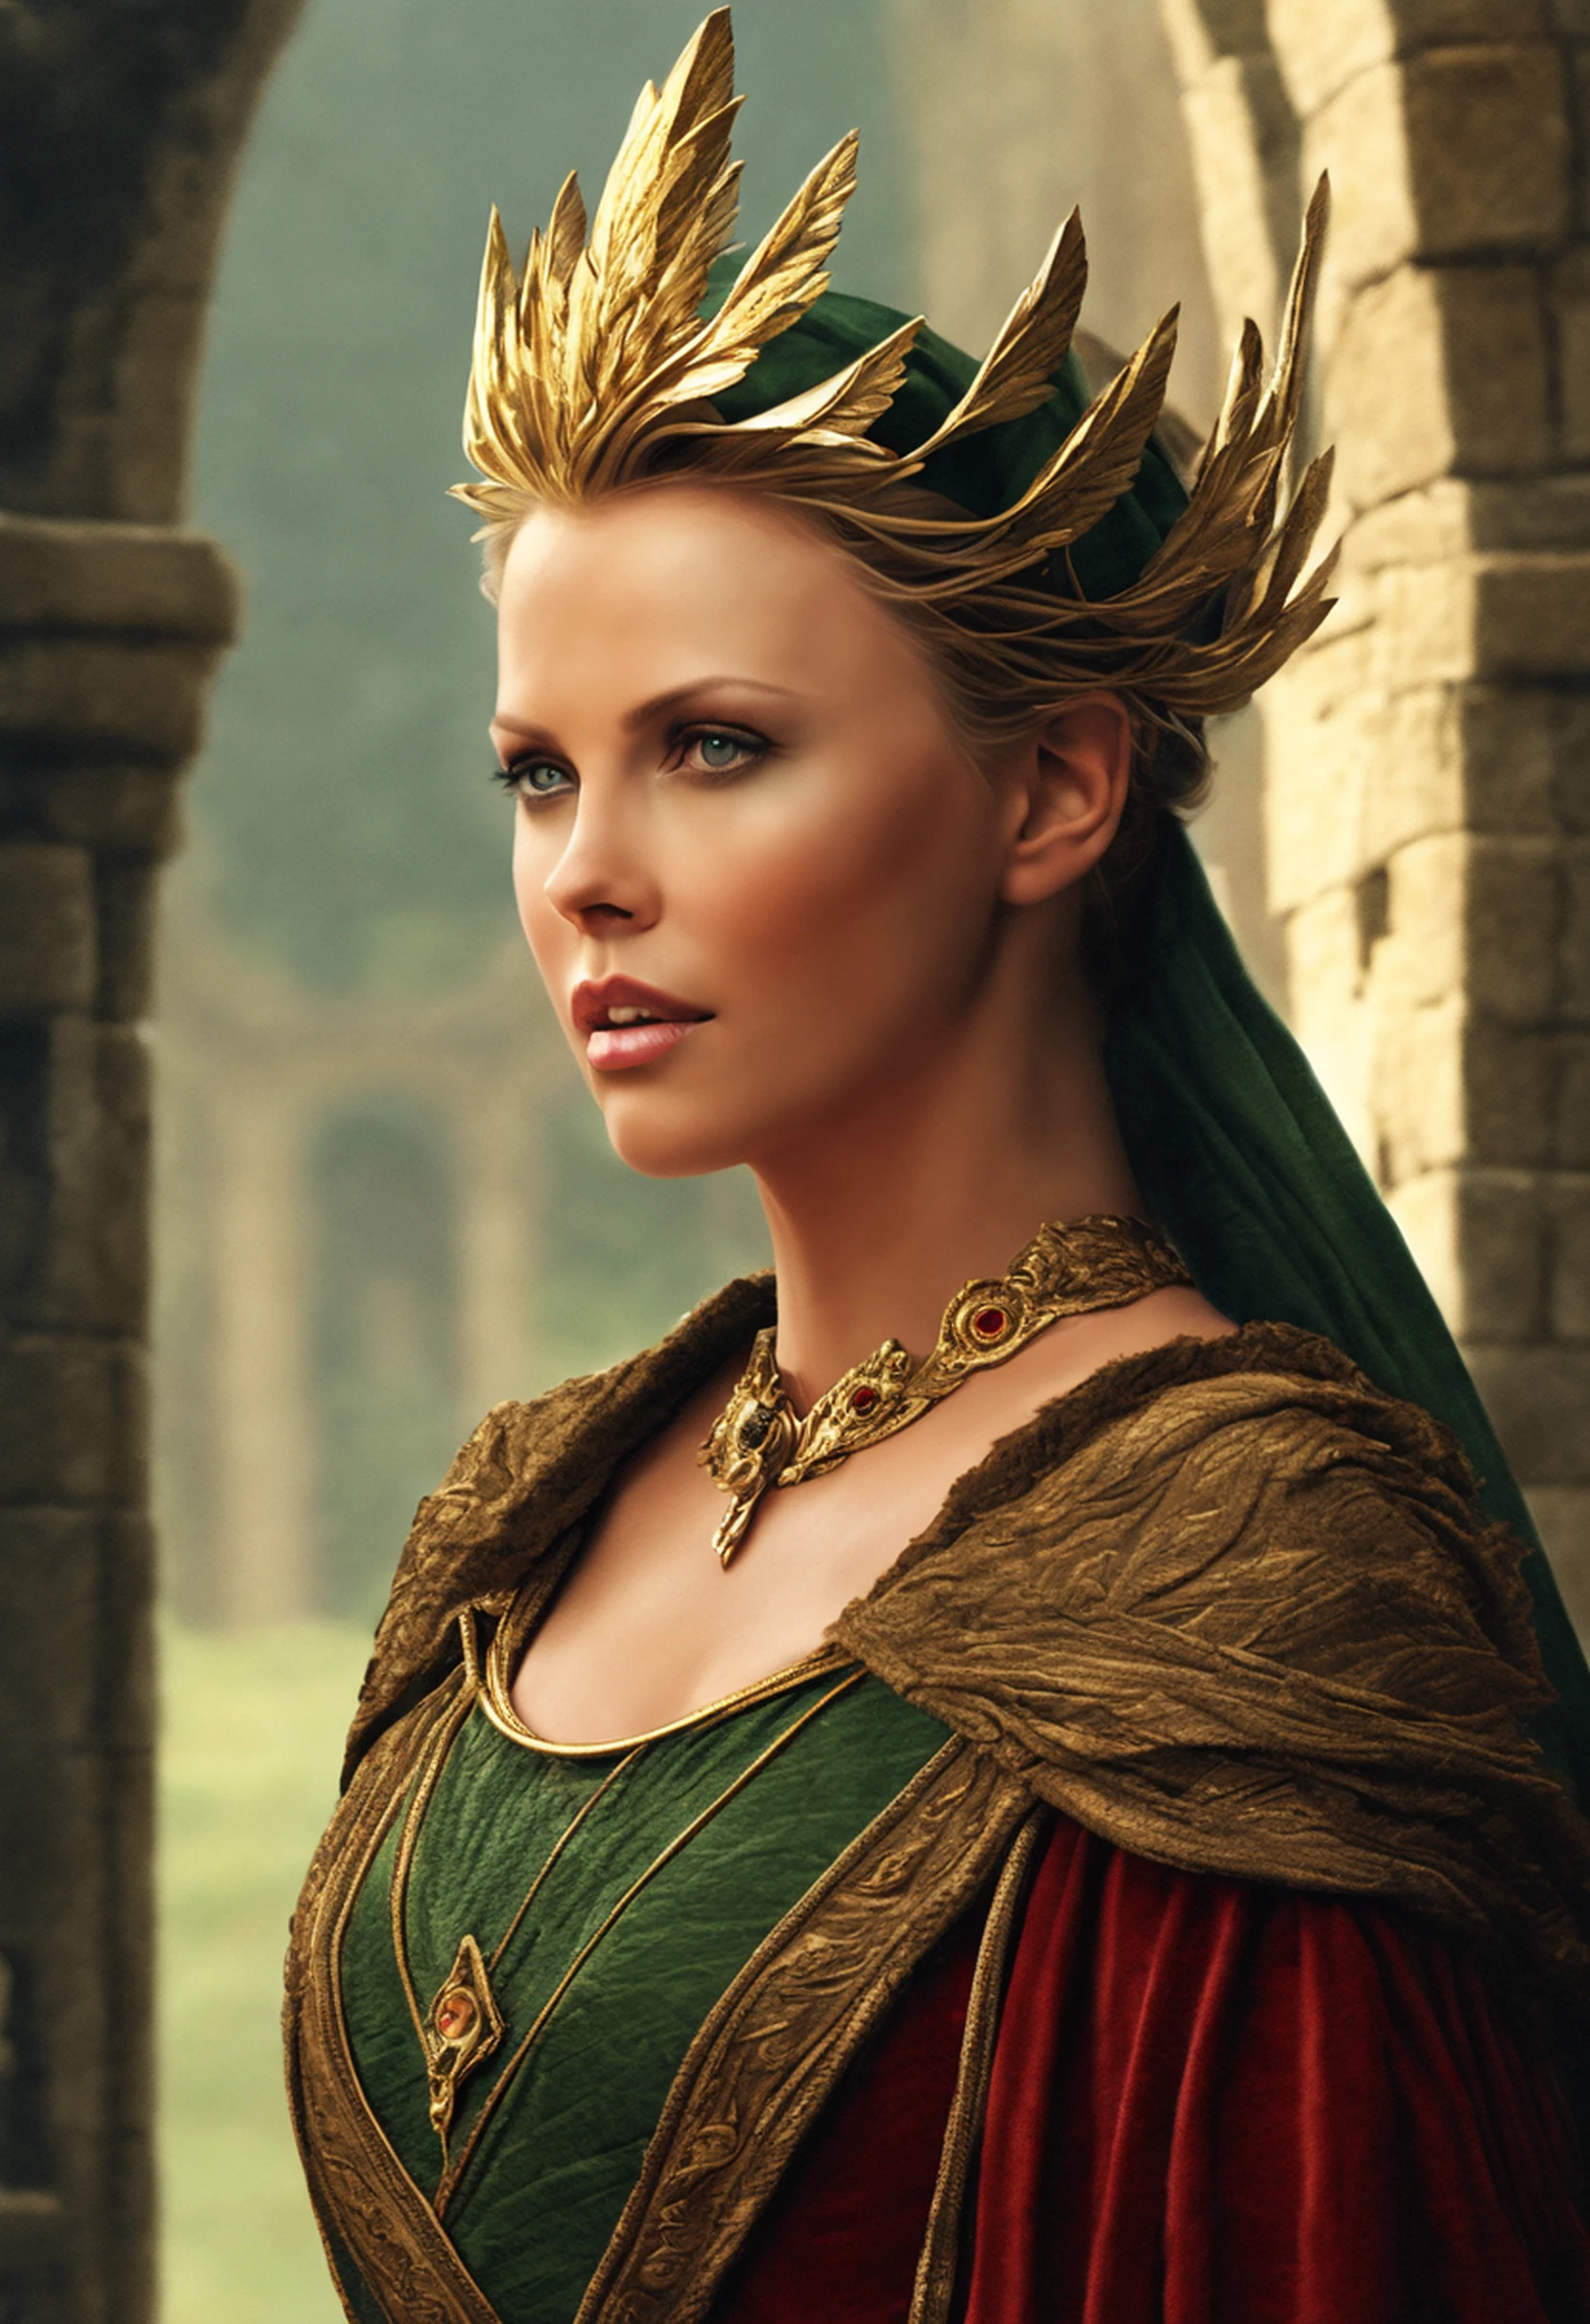 ((Charlize Theron), (arwen)), modelshoot style, Looks like Keira Knightley, (extremely detailed CG unit 8k wallpaper), full shot body photo of the most beautiful artwork in the world, English medieval witch, green vale, pearl skin,golden crown, diamonds, Detailed background with medieval architecture, professional majestic oil painting by Ed Blinkey, Atey Ghailan, ghibli studio, Directed by: Jeremy Mann, Greg Manxadinho, Antonio Moro, trending on ArtStation, trending in cgsociety, intrikate, High detail, sharp focus, Dramatic, photorealistic painting art by midjourney and greg rutkowski